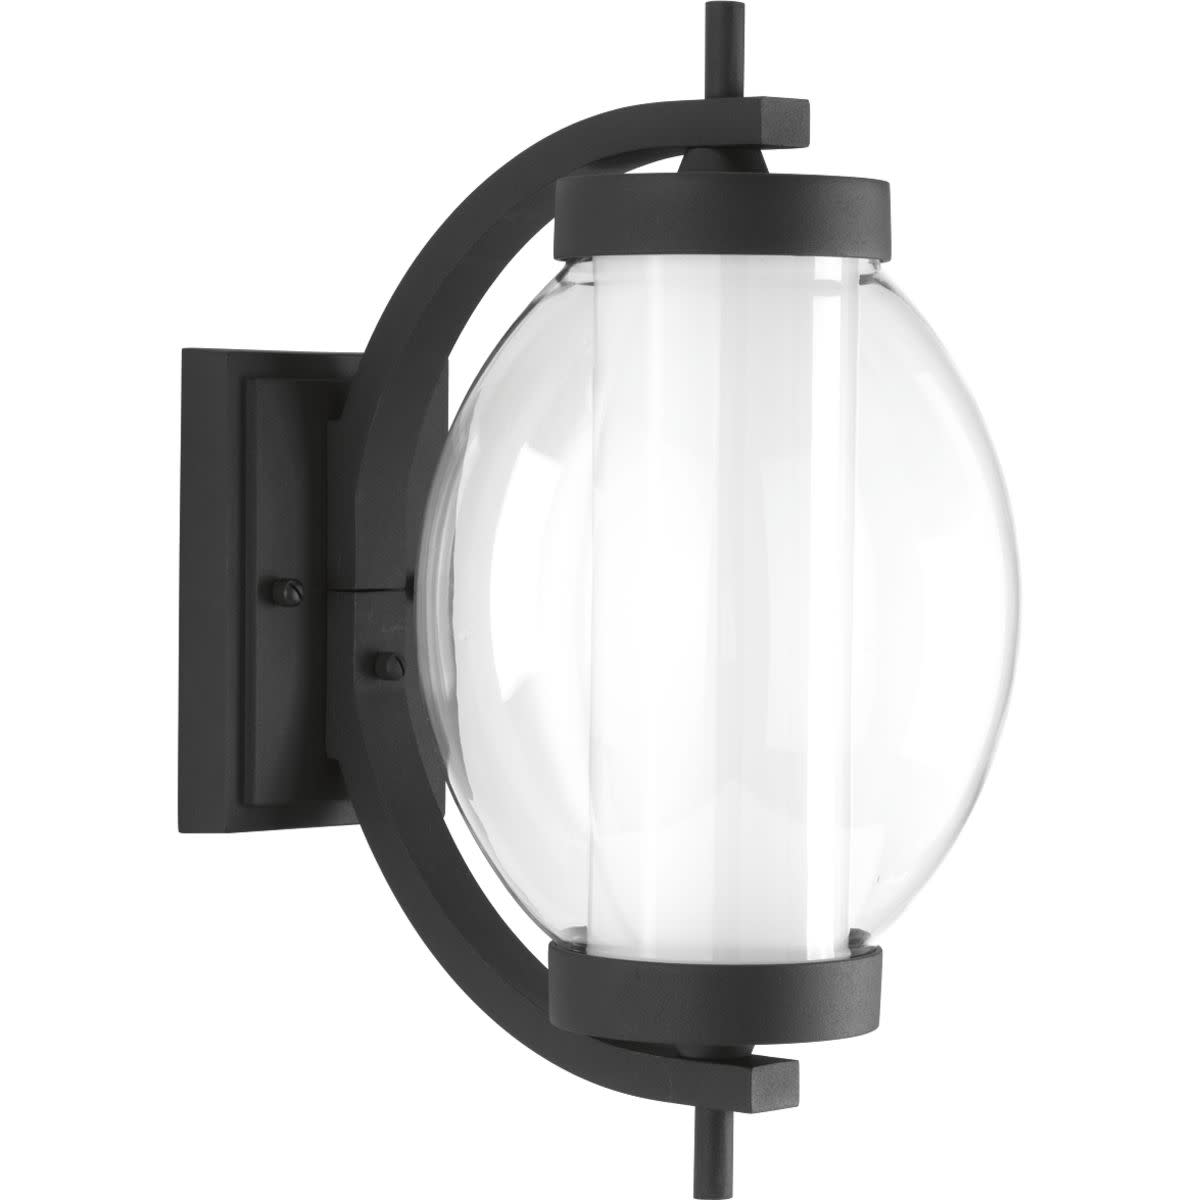 Ellipsis Collection One-Light LED Wall Lantern - image 1 of 2